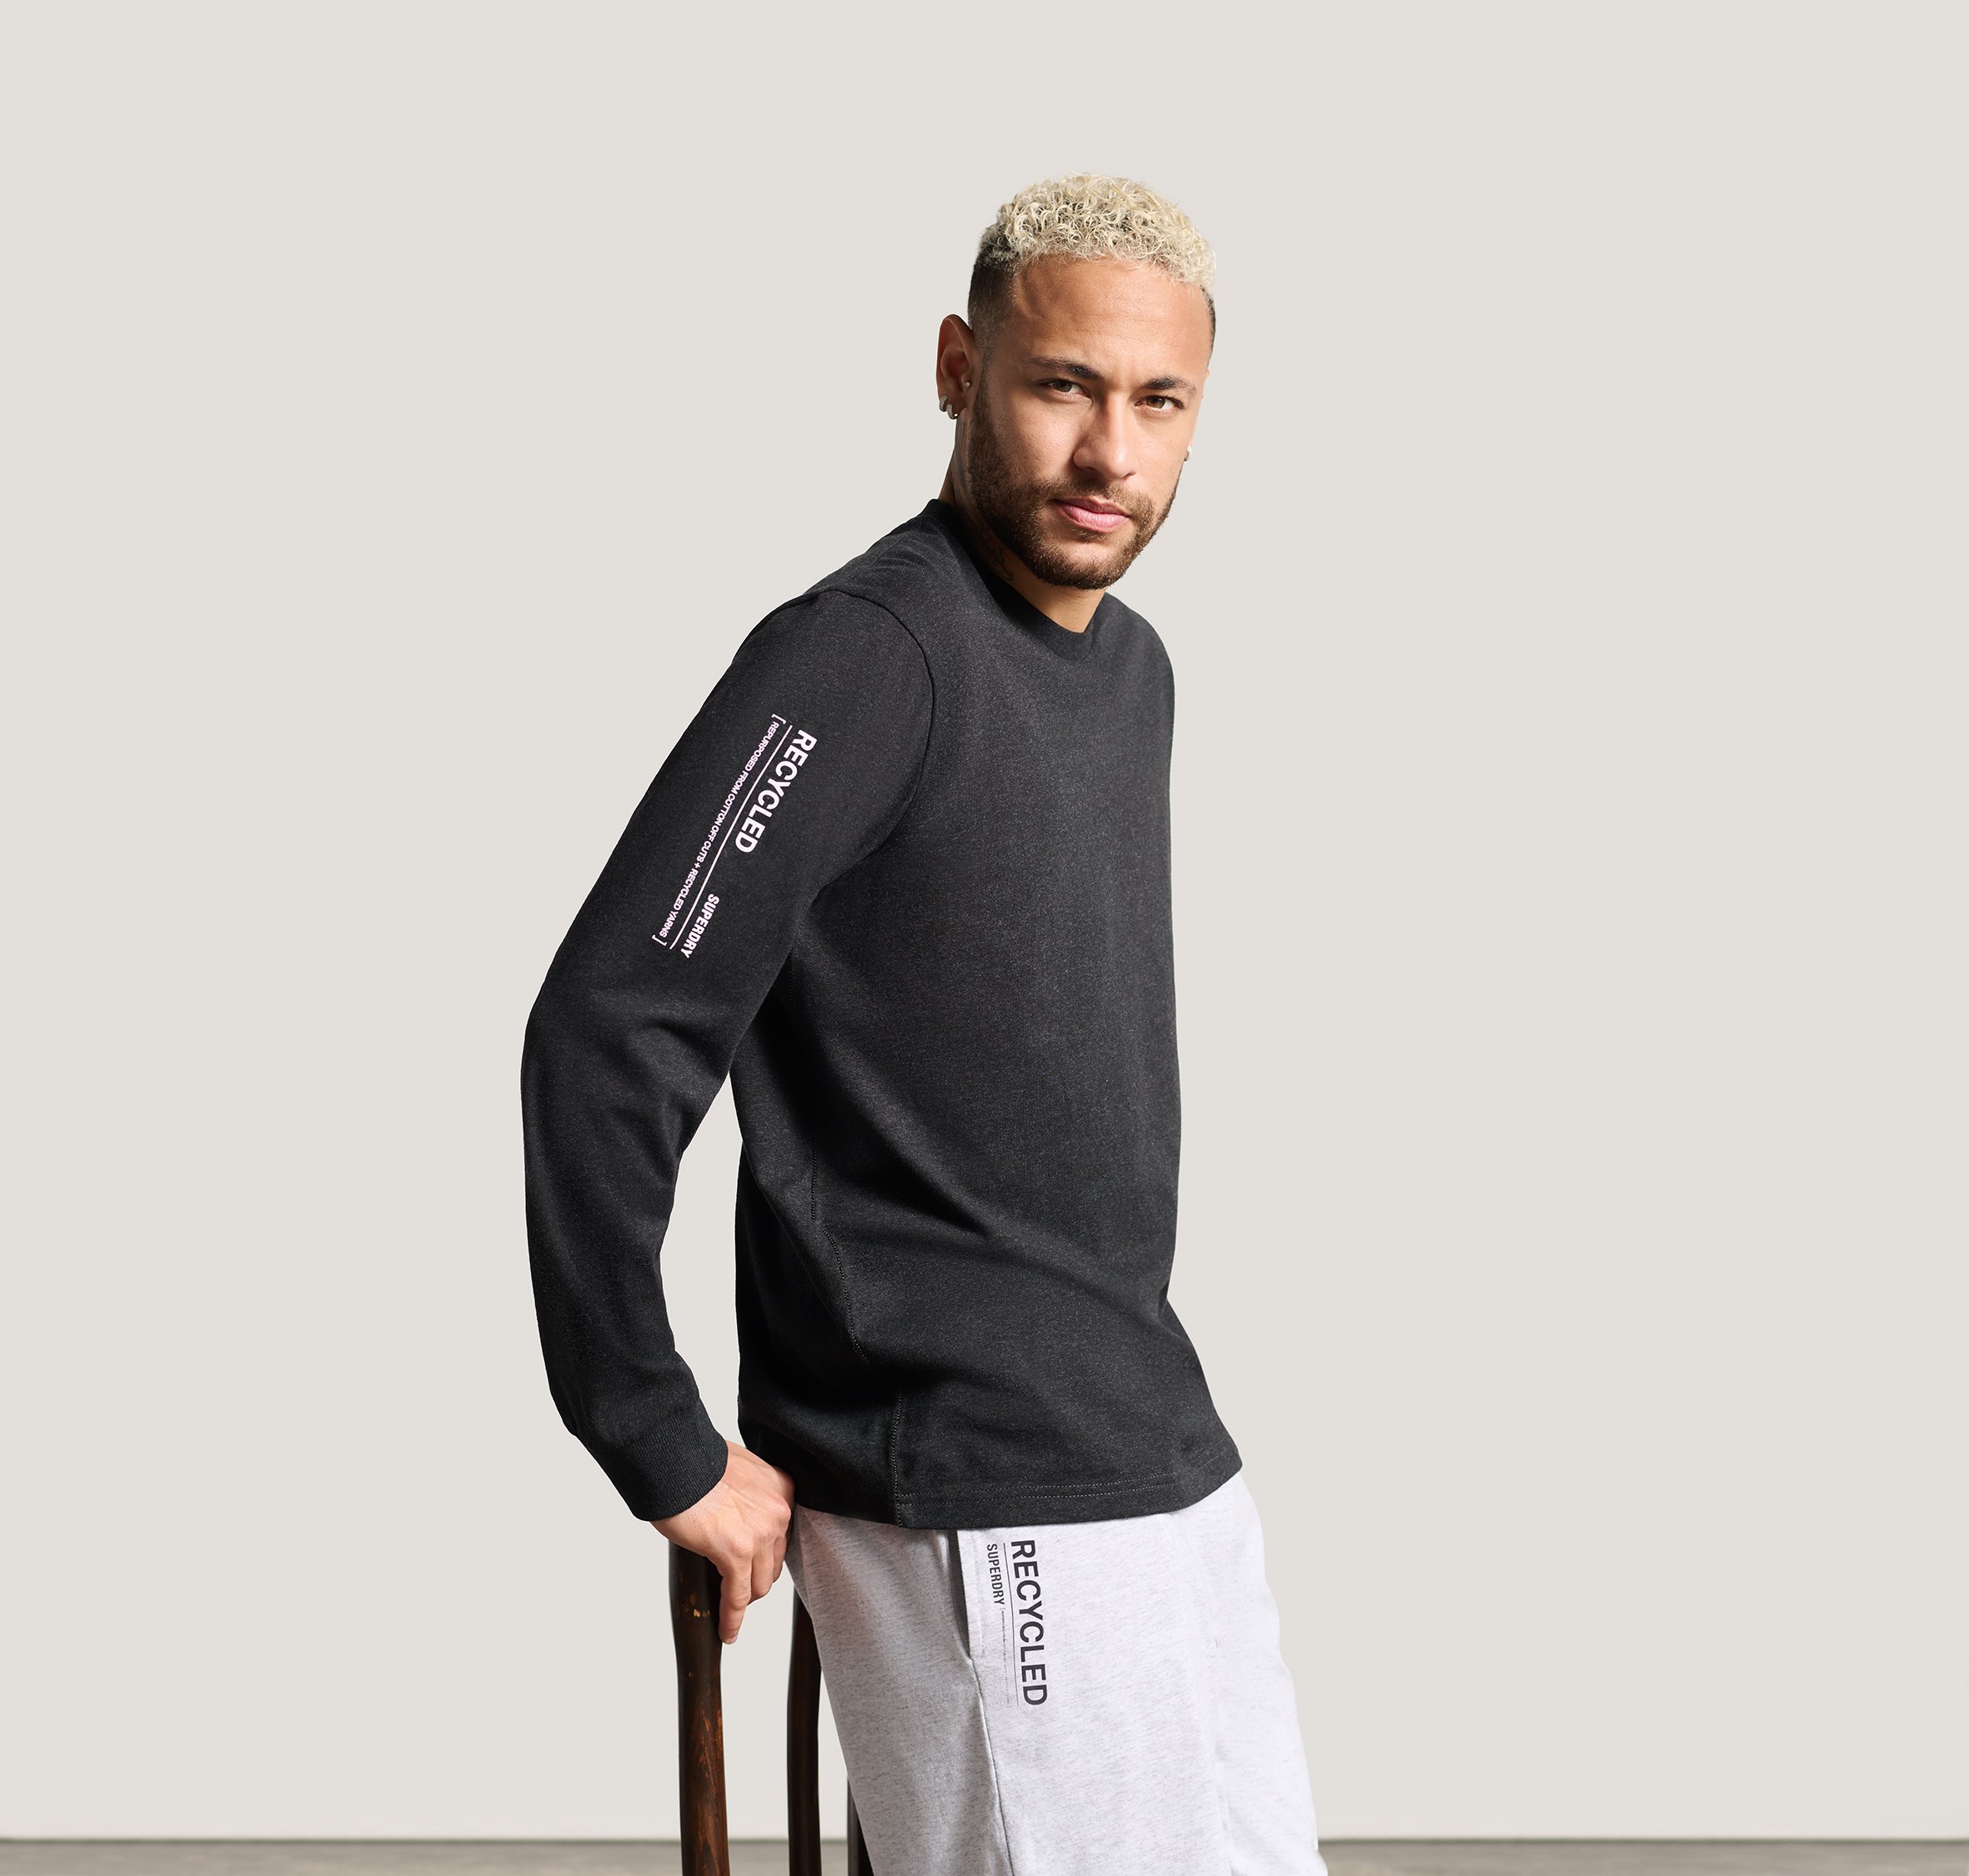 Superdry Stock Plunges 16% But Neymar And Sustainability May Come